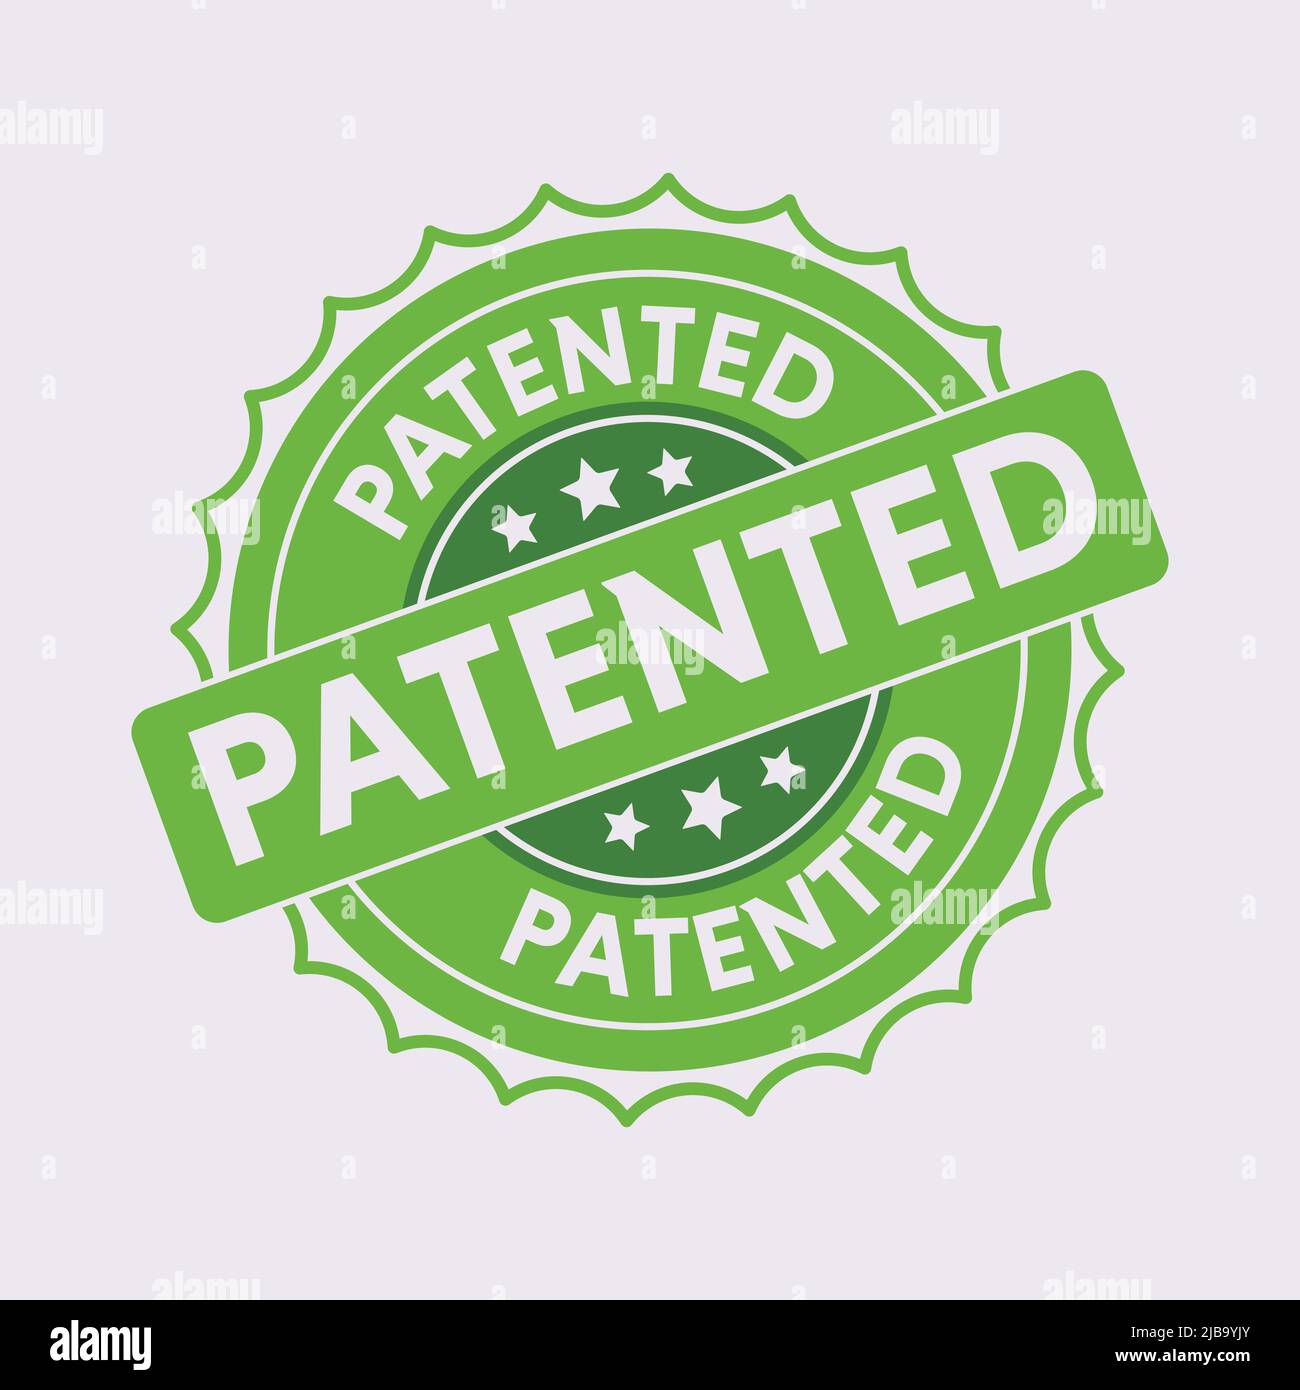 Patented old grunge stamp vector illustration. Patented stamp. Patented icon. Patented rubber imprint Stock Vector